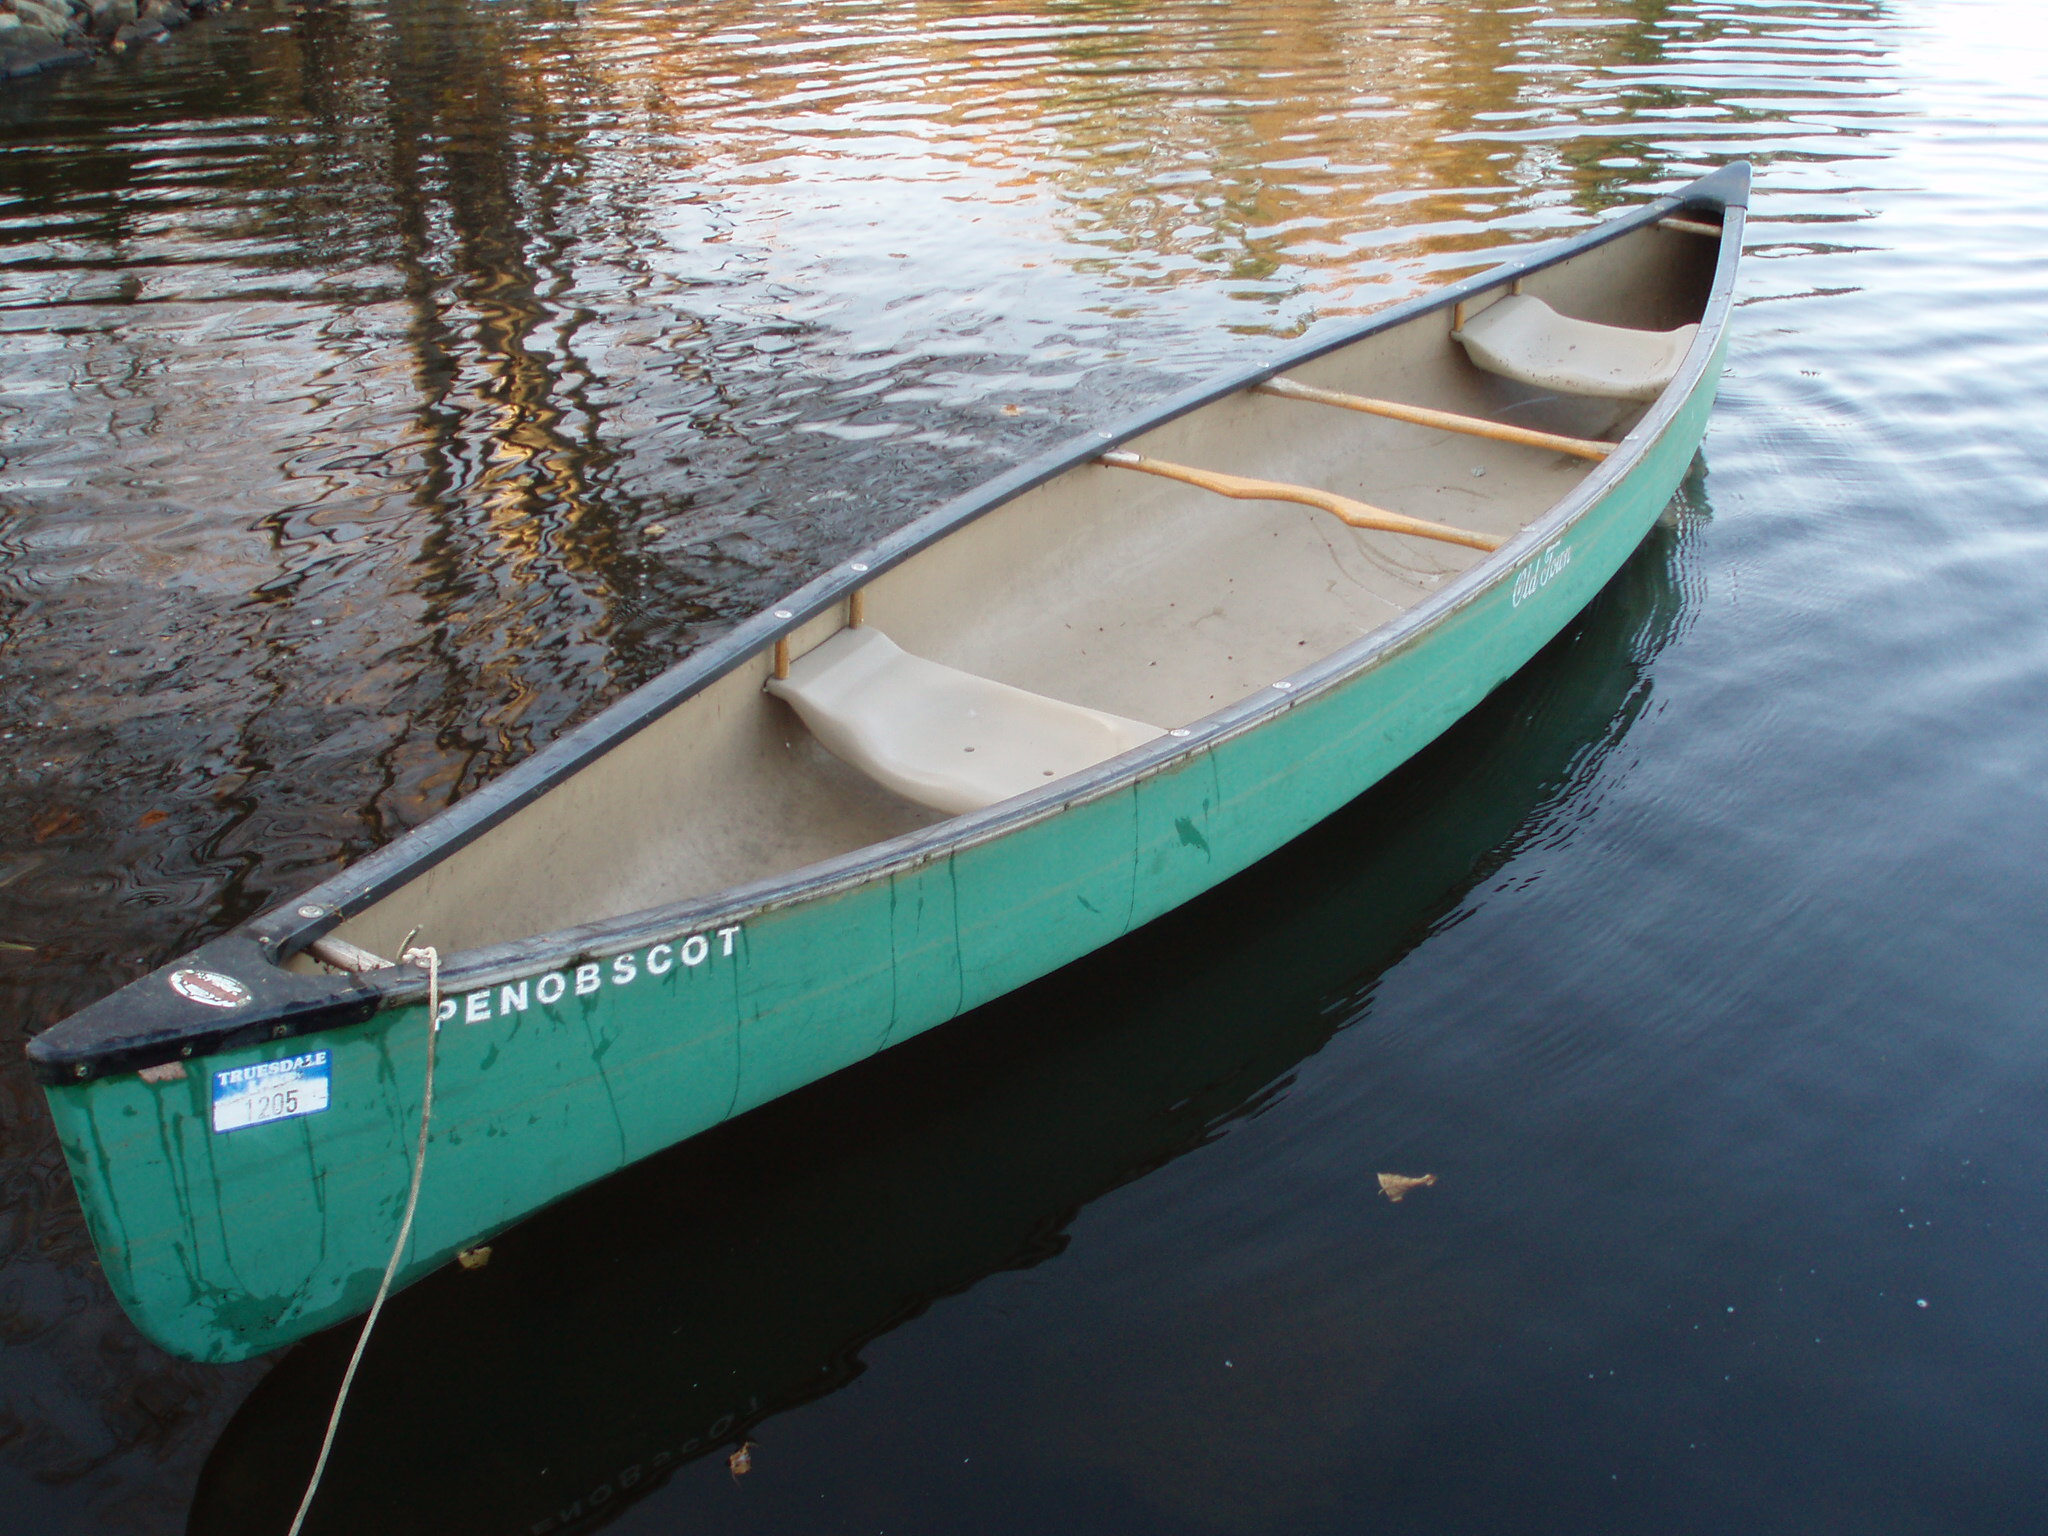 PR Boat: Free access Old town canoe-wood and canvas